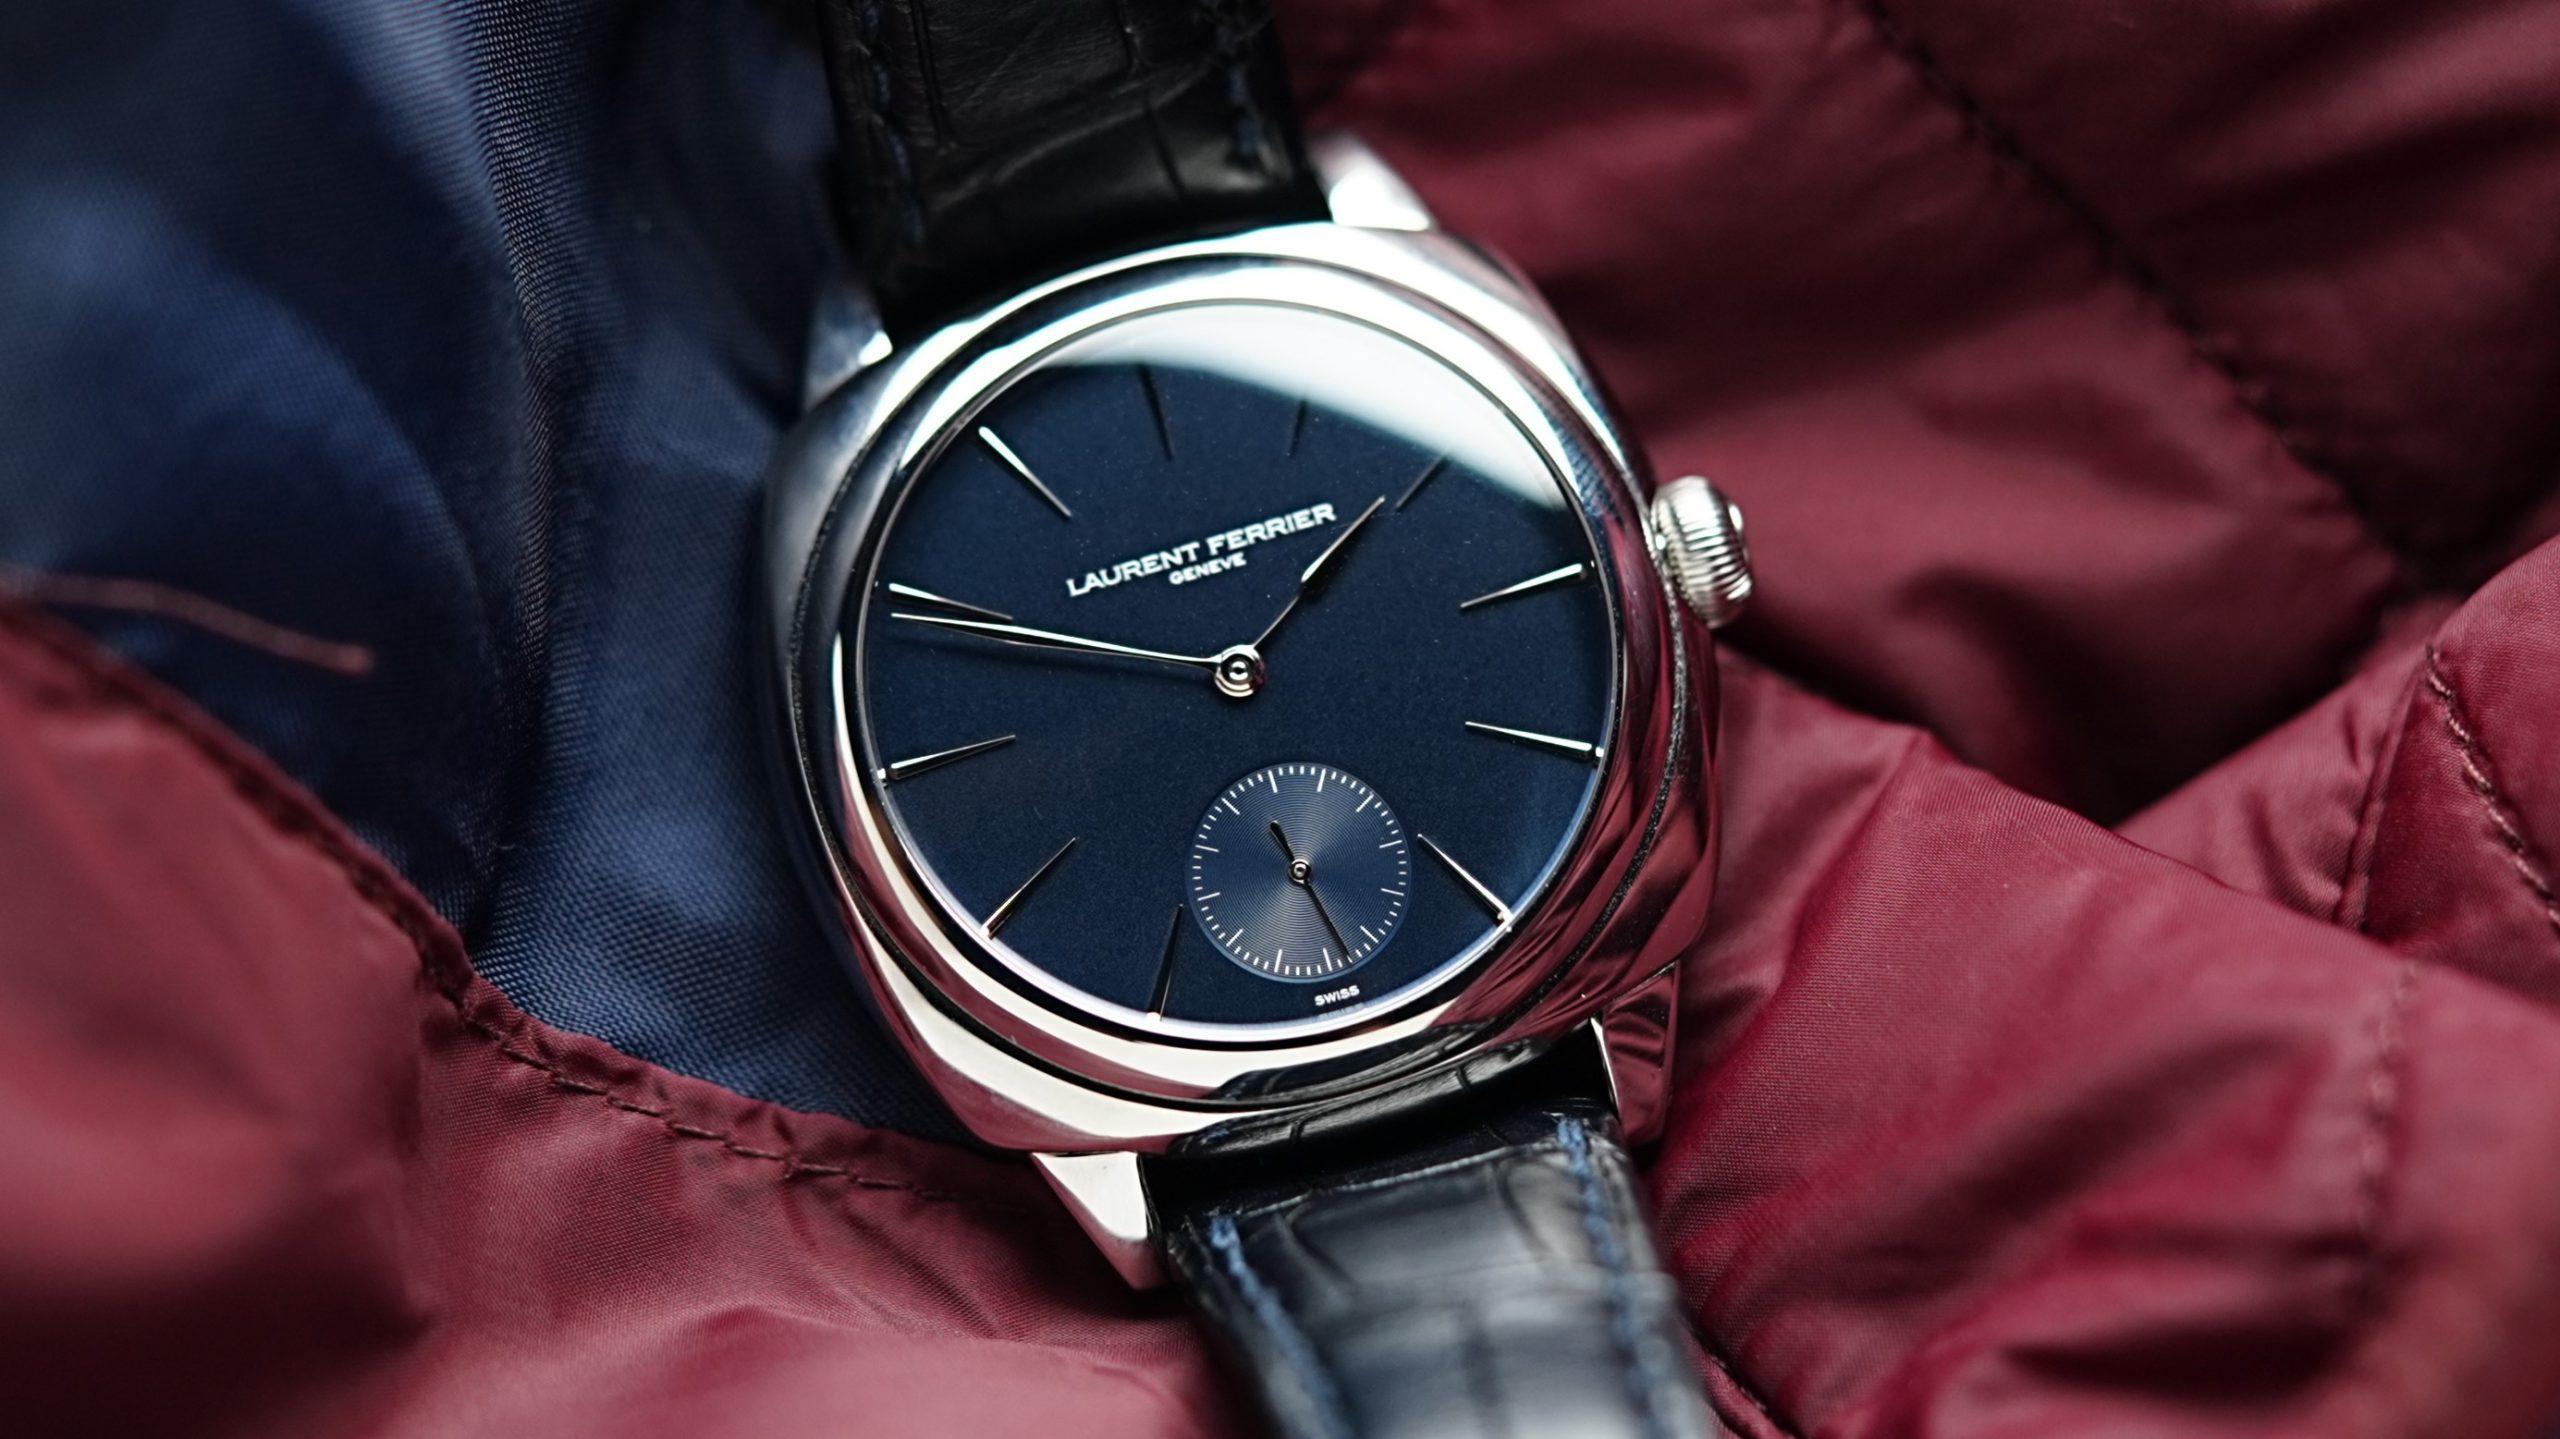 Laurent Ferrier MICRO-ROTOR GALET SQUARE with burgundy background up close.